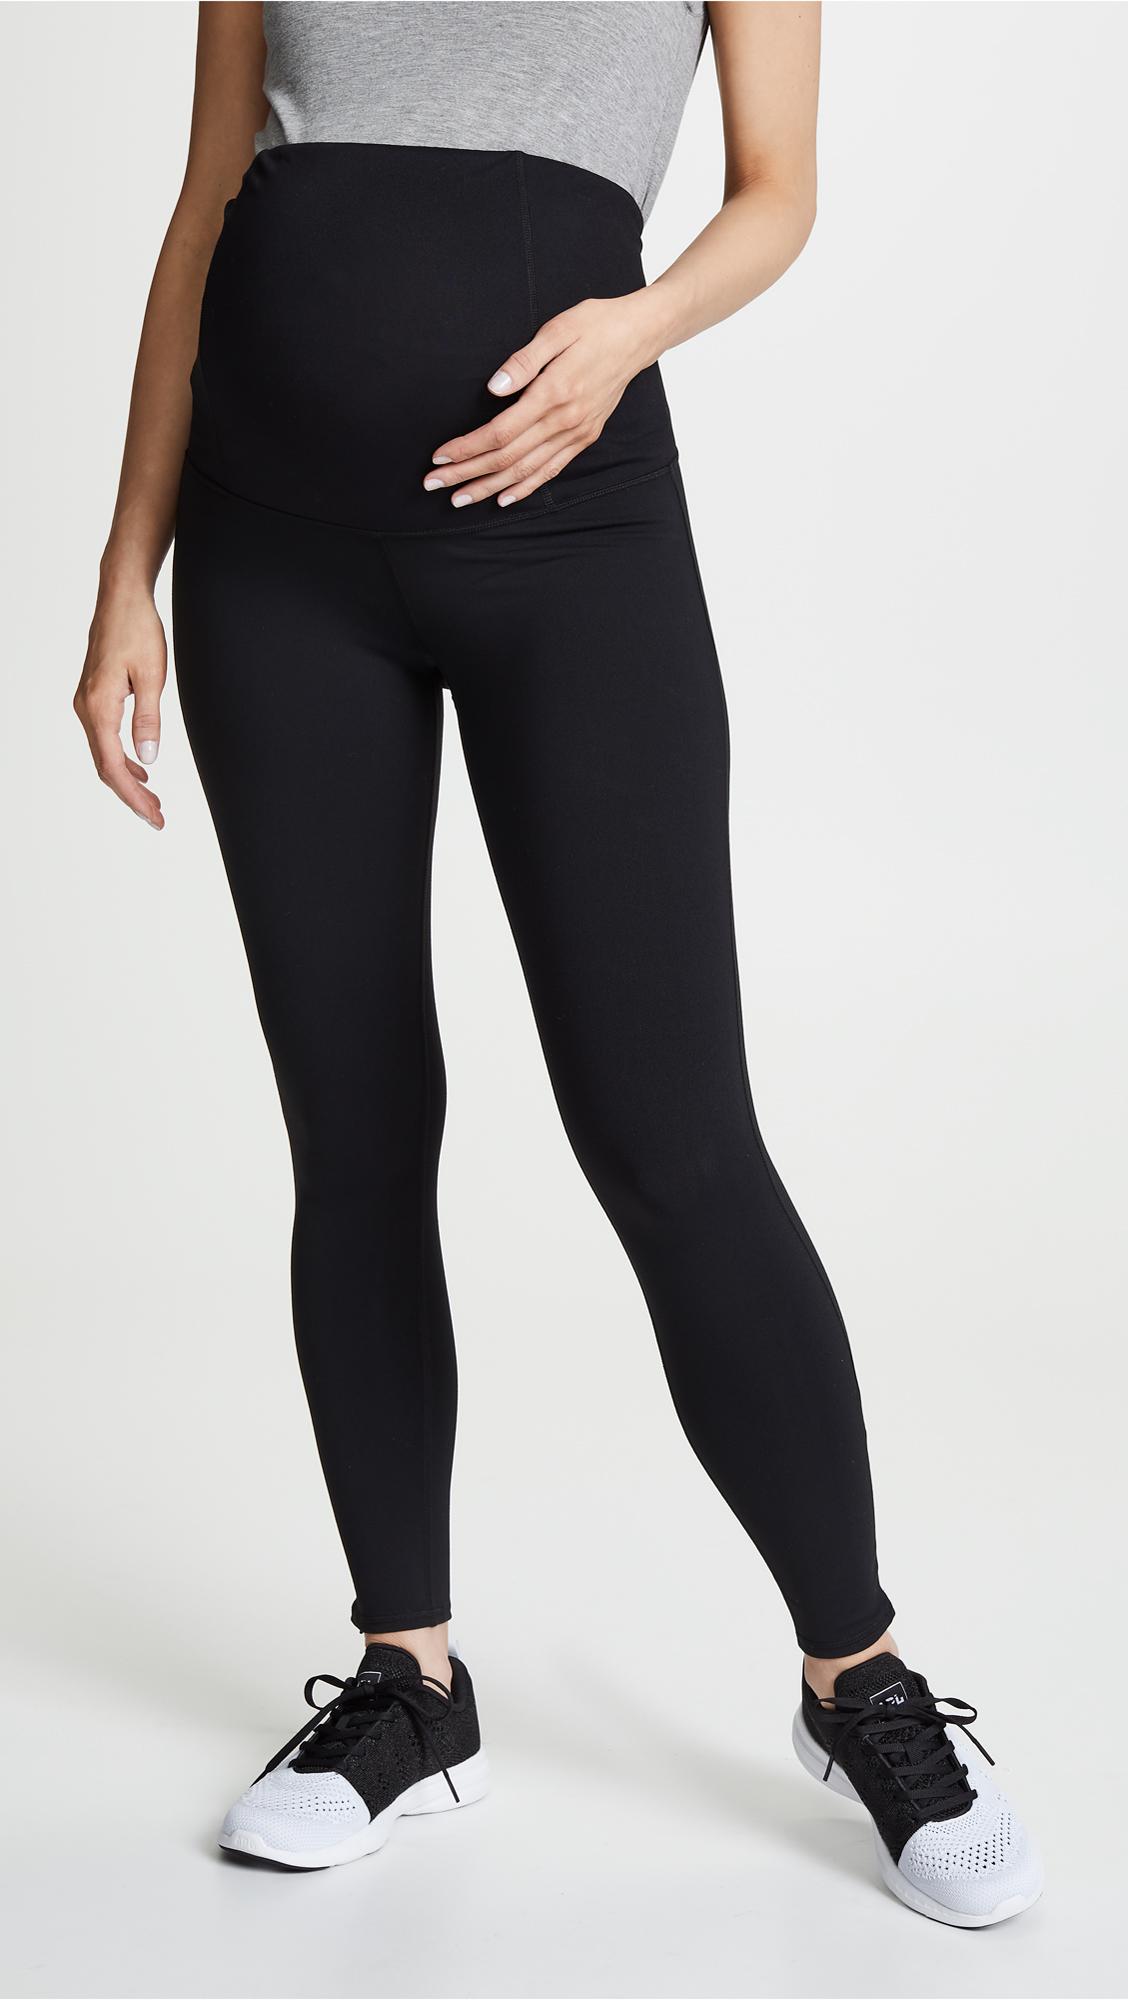 Ingrid & Isabel Synthetic Active Maternity Leggings in Black - Lyst